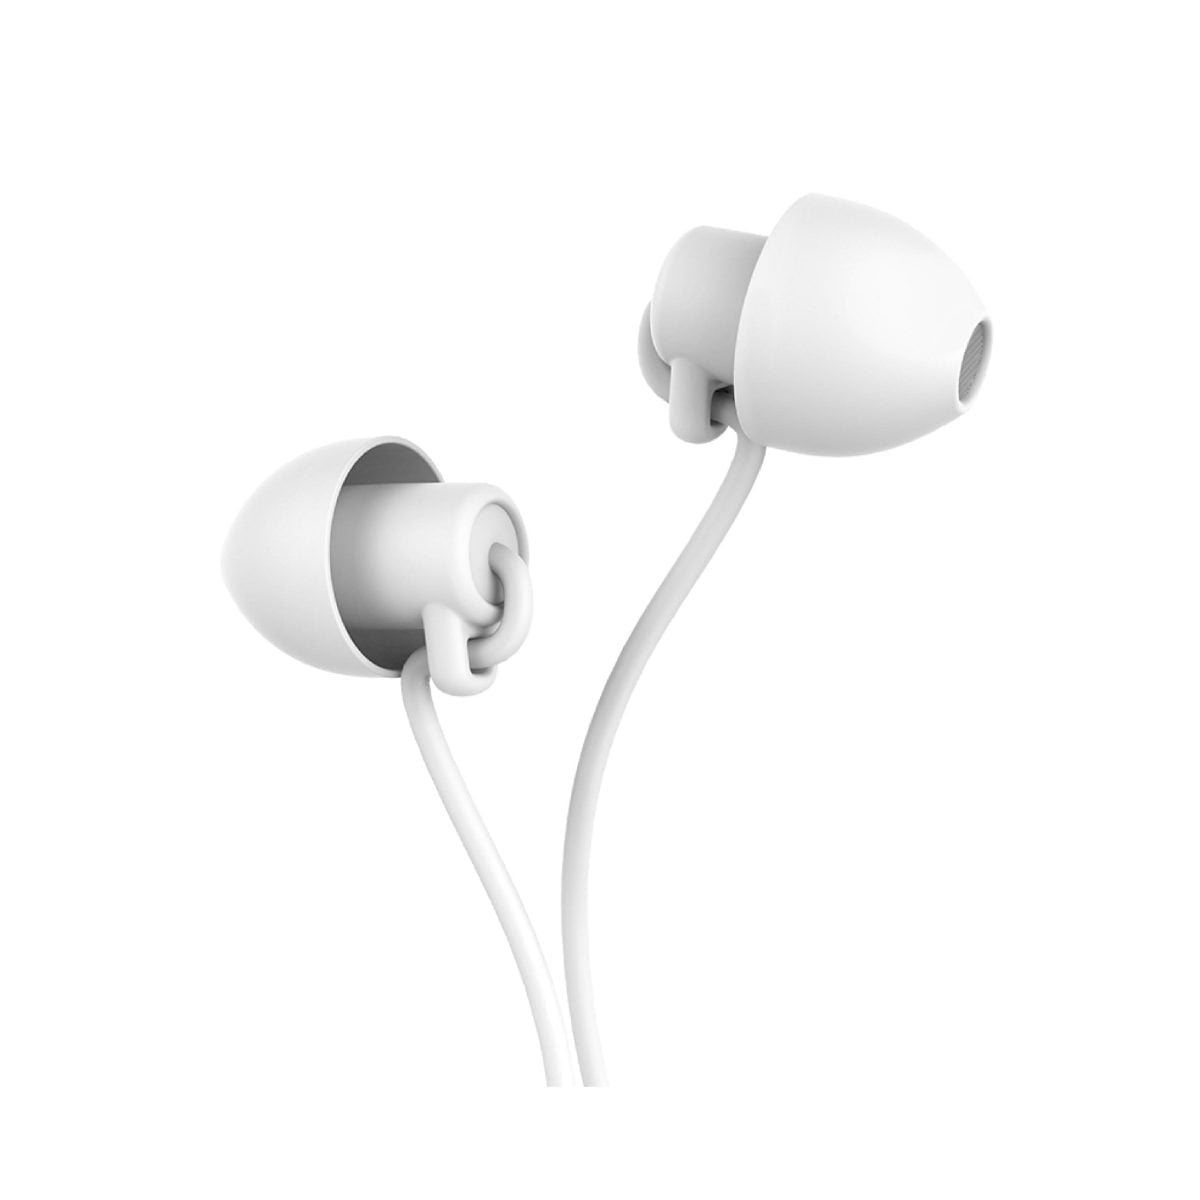 Earphone98 03 Scaled Hoco Material: Silica Gel, Tpe Enameled Wire Length: 1.2M, Weight: 10G Speaker: 6Mm Connector: 3.5Mm Microphone: With A Wheat Controller Wire Control: Single Button Control Silicone Material, Soft And Does Not Oppress The Ear, Suitable For Sleeping Silicon Sleep Earphones M56 Earphone Wired Headphones With Mic – White Silicon Sleep Earphones M56 Earphone Wired Headphones With Mic – White